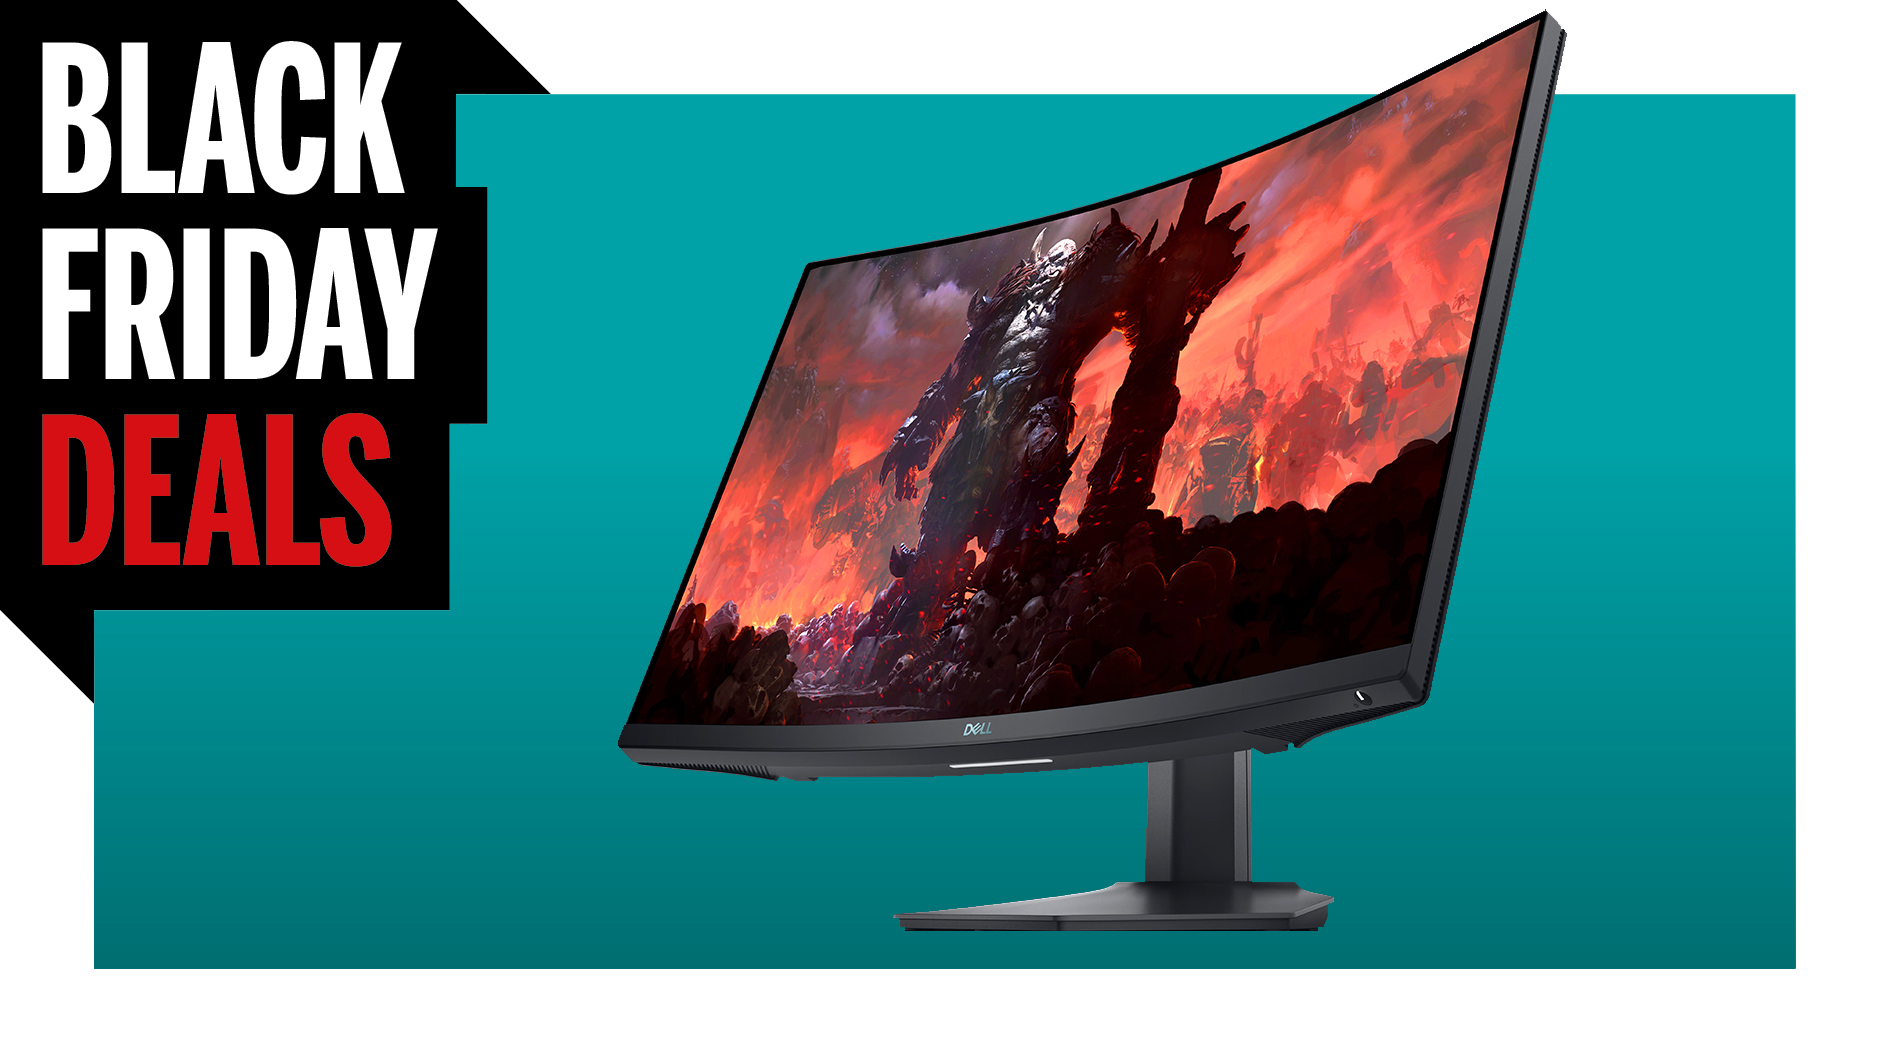  Our favorite 1440p 165Hz gaming monitor is $100 cheaper for Black Friday 